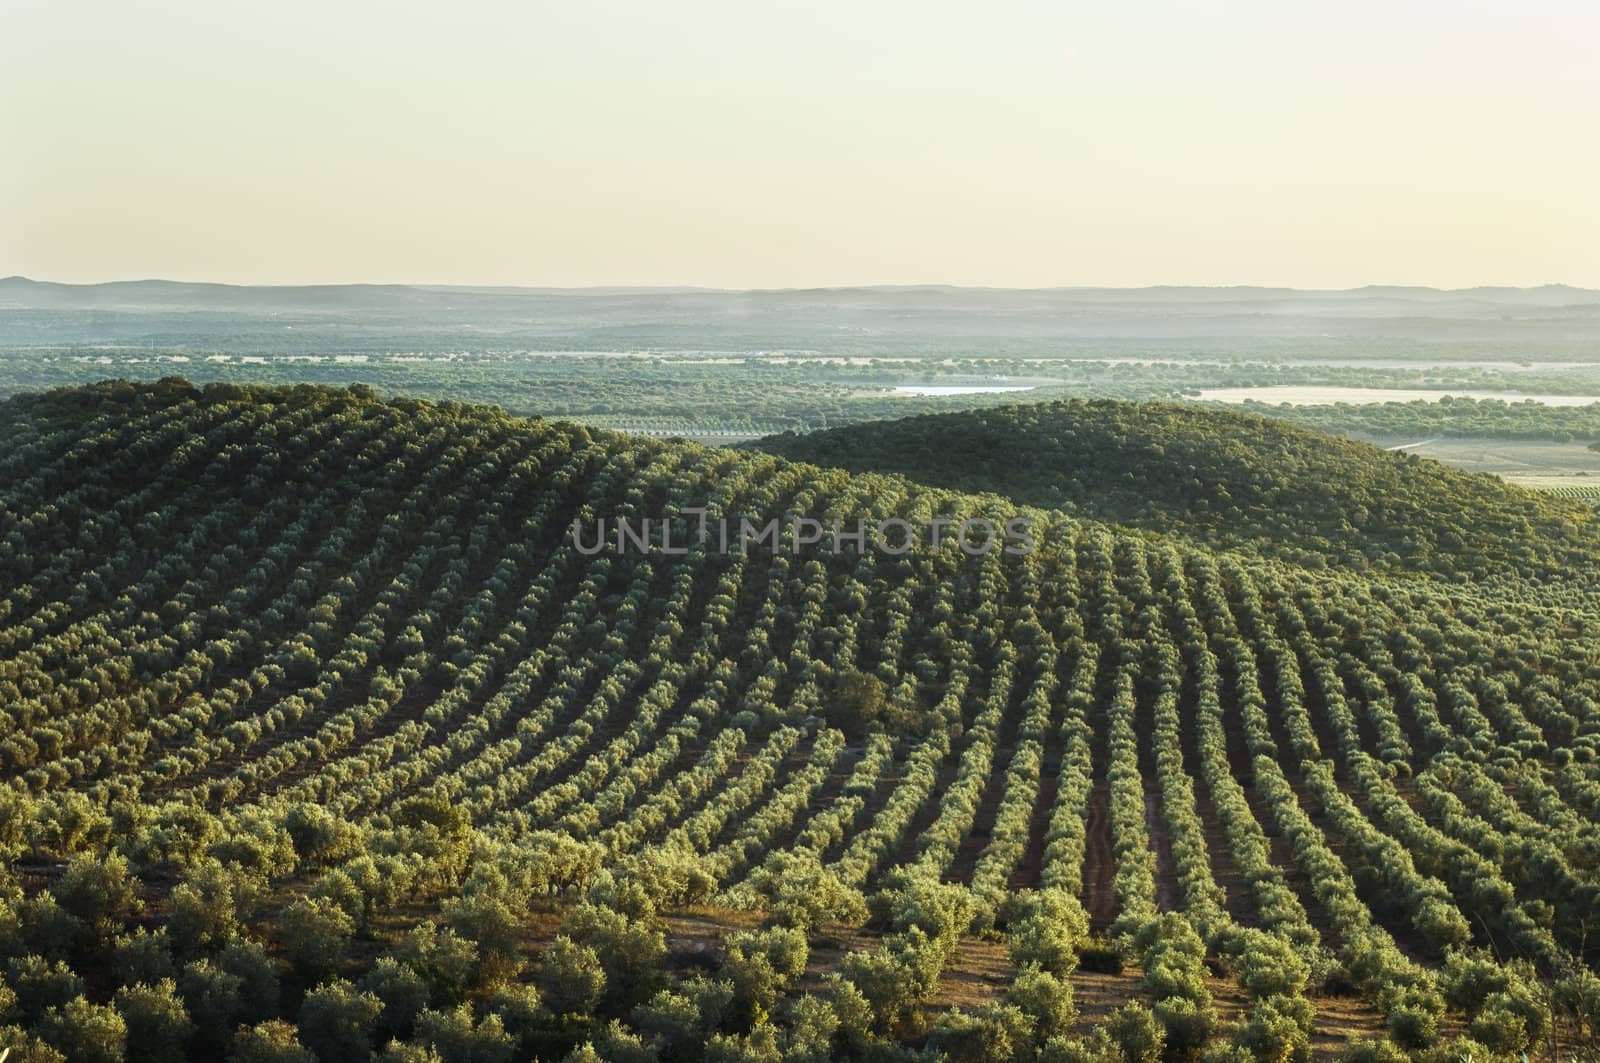 Extensive olive grove in the plains of Alentejo, Portugal
